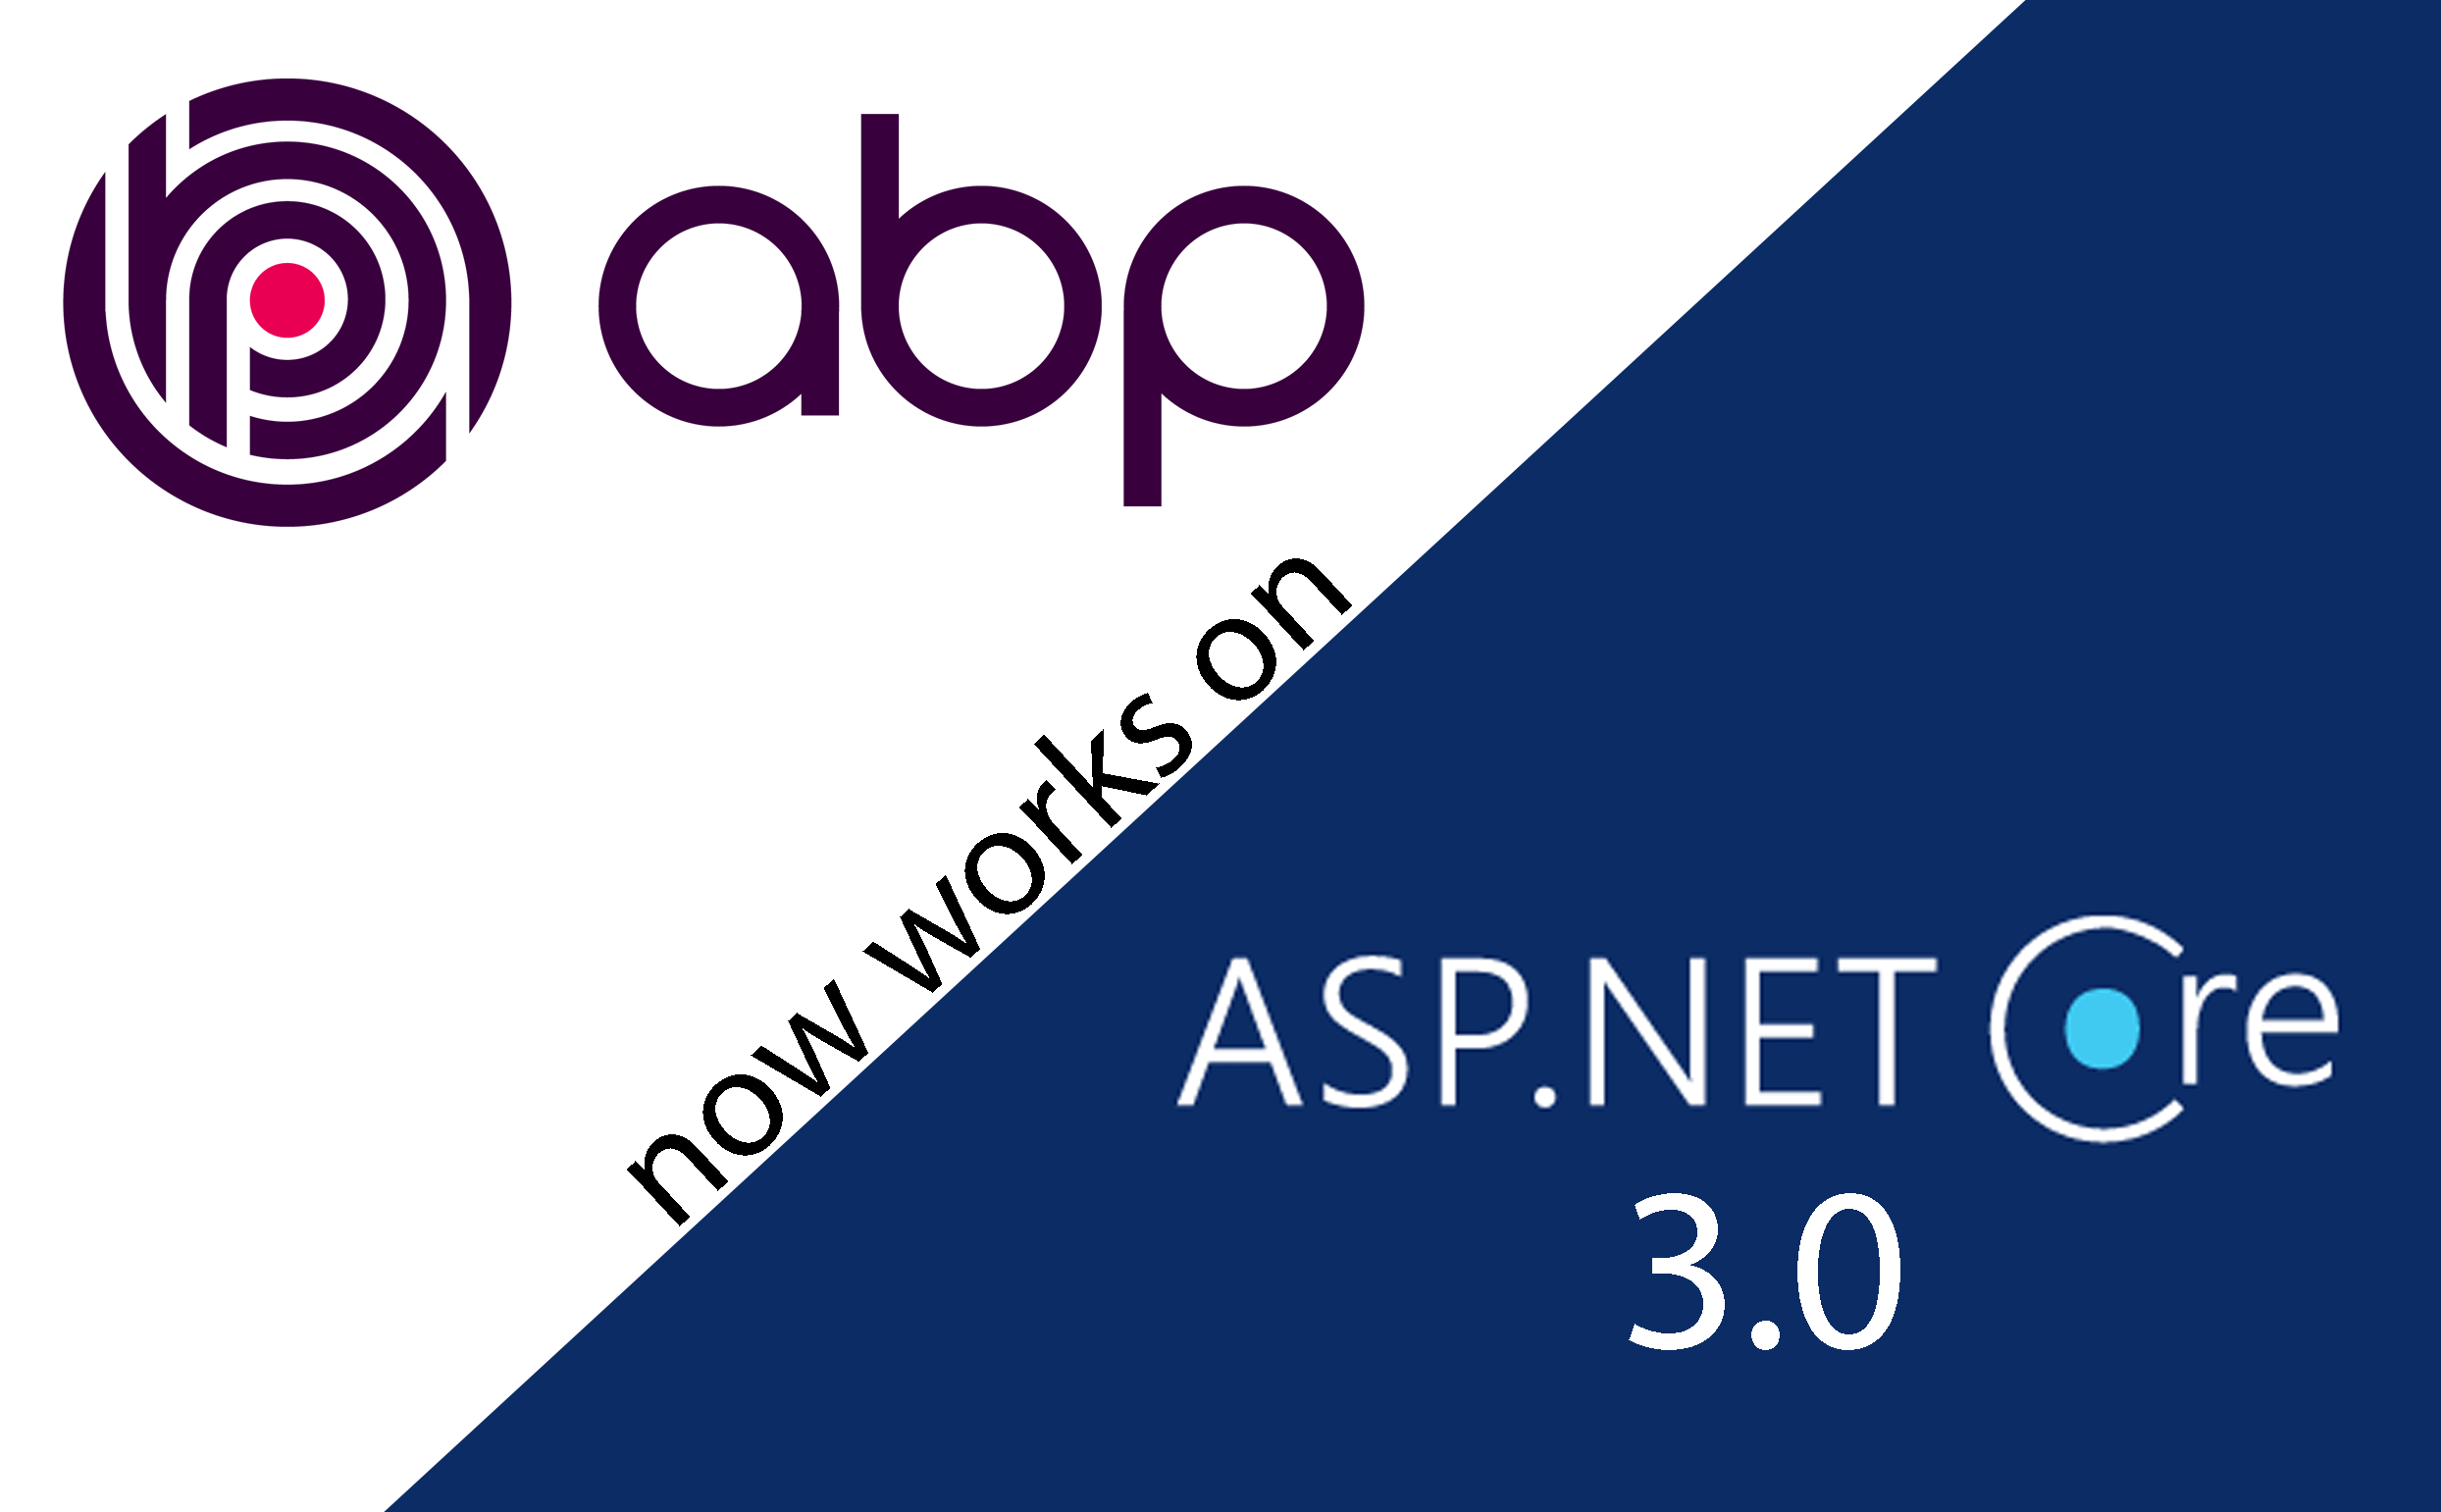 ABP v0.21 Has Been Released based on the ASP.NET Core 3.0 cover image